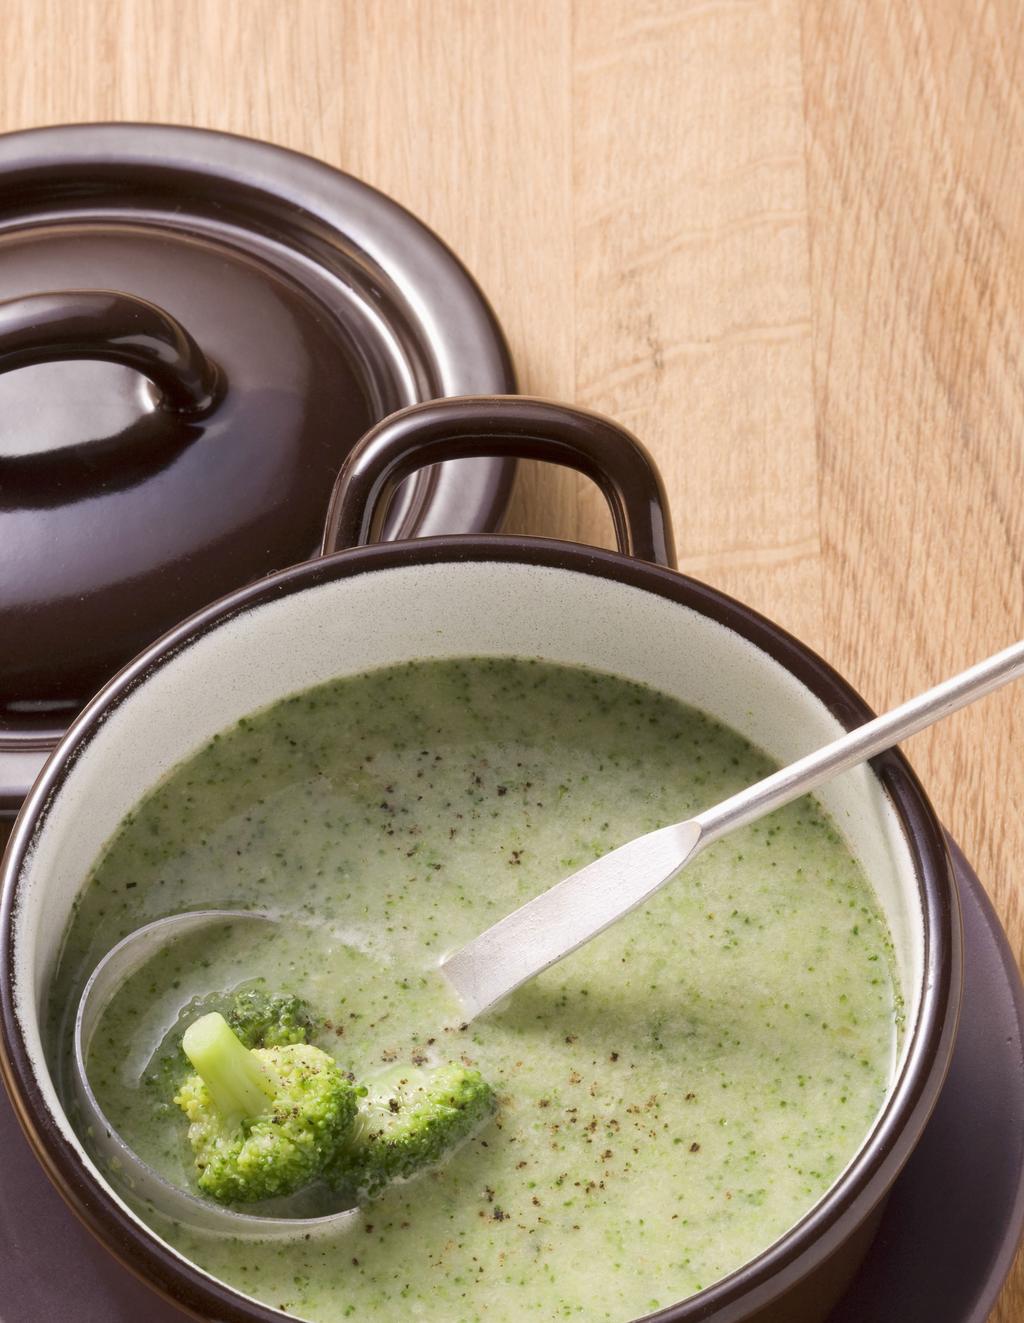 broccoli-garlic soup Ingred ient s 3 lb broccoli ½ cup extra-virgin olive oil 8 cloves garlic 2 tsp. fresh thyme 6 cups vegetable stock ¼ cup dry white wine 2 tbsp. lemon juice 2 tsp.